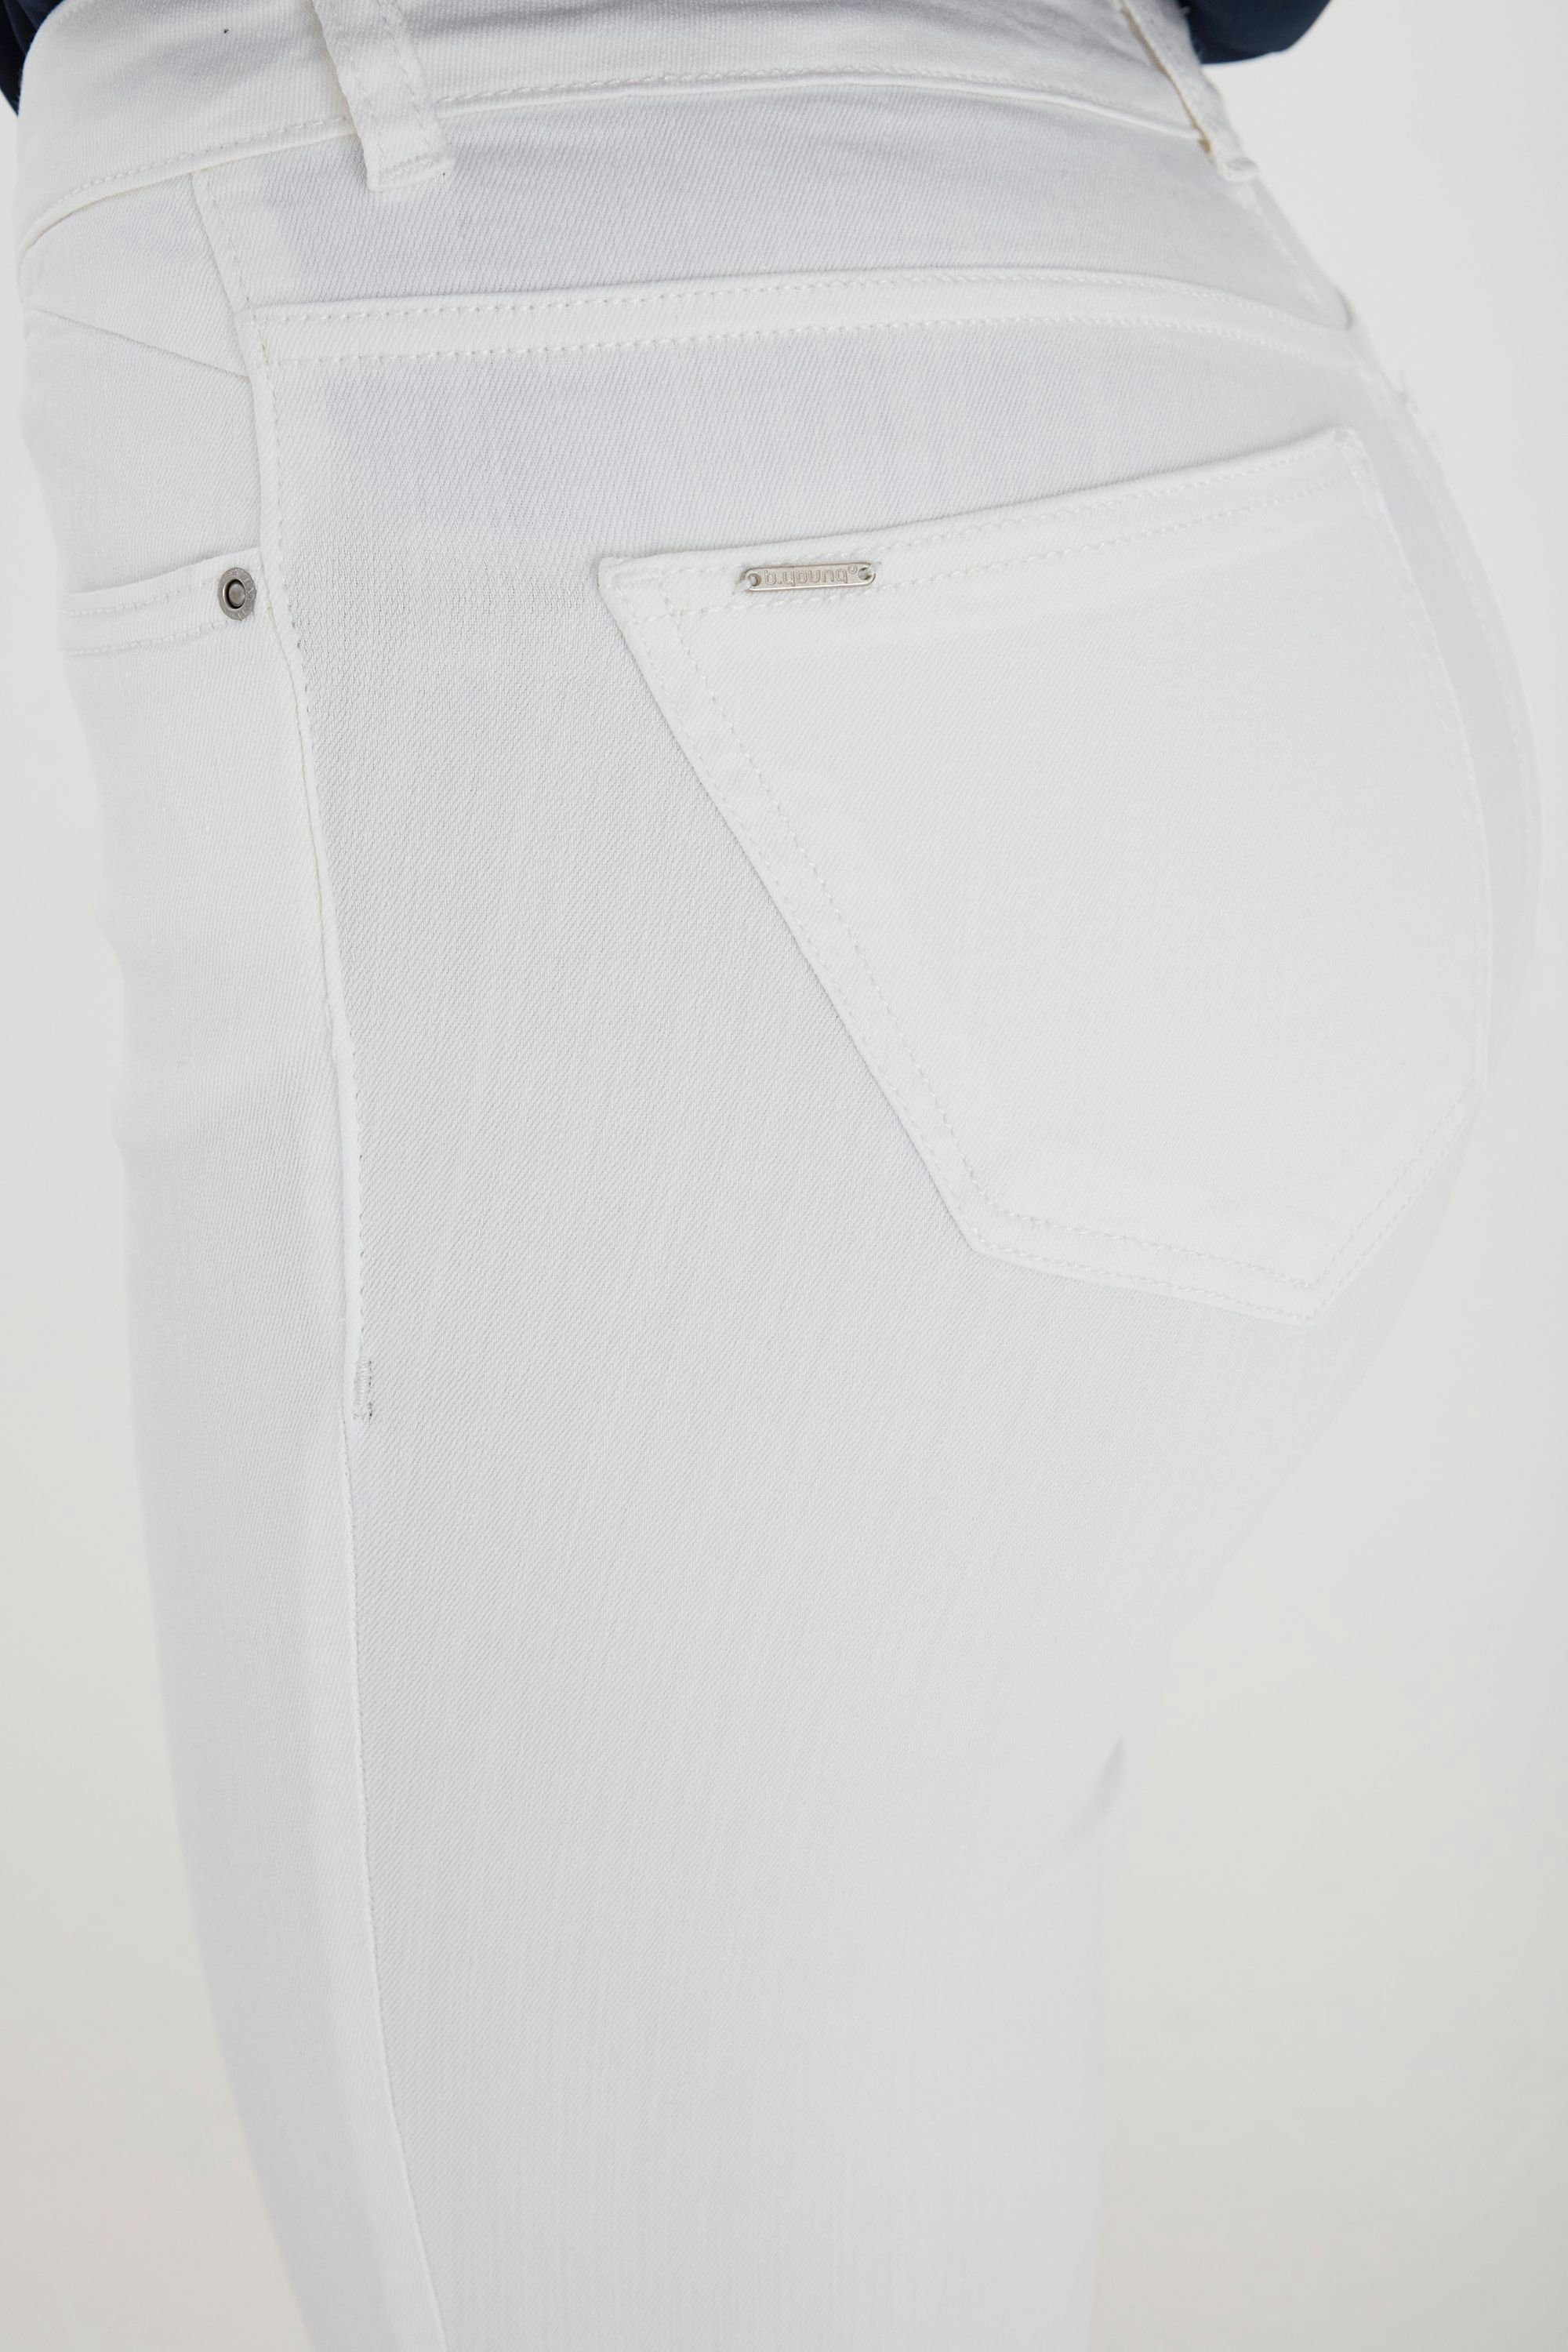 b.young Skinny-fit-Jeans Luni - 20803214 White jeans (80100) BYLola Optical